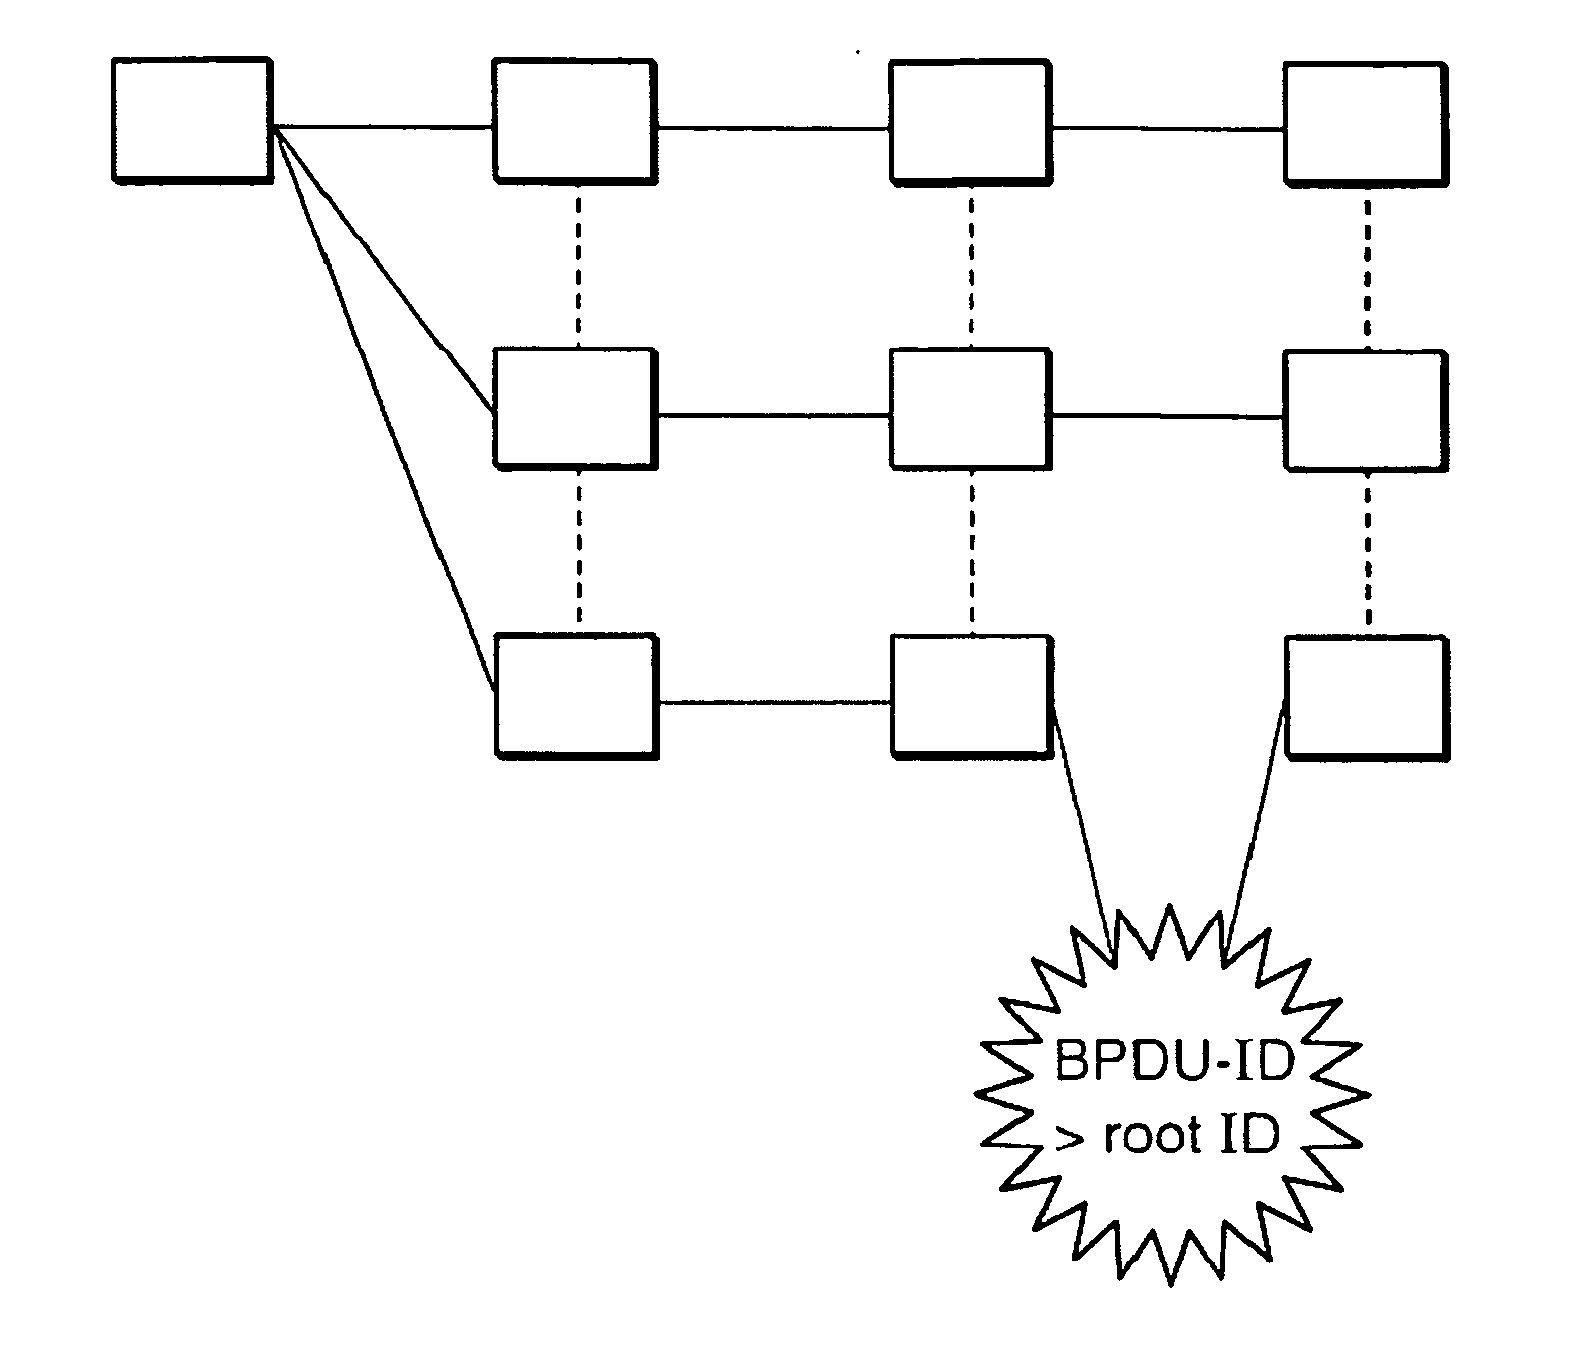 Method for protecting a network configuration set up by a spanning tree protocol